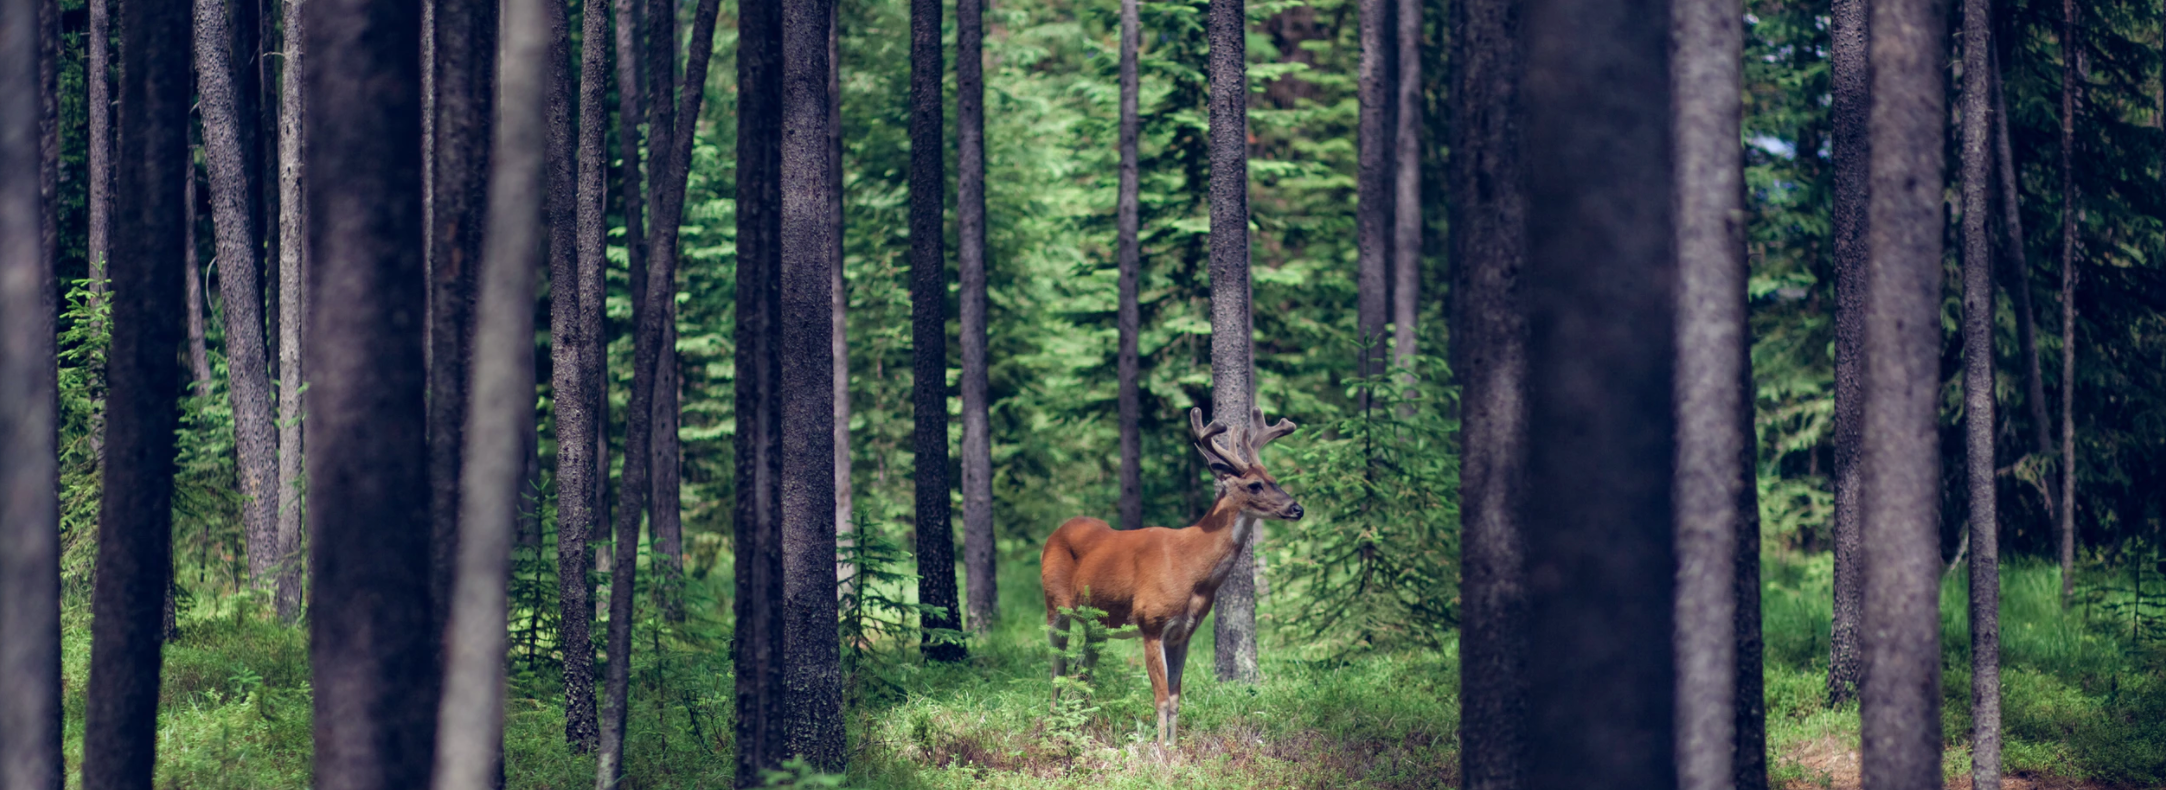 Sustainable furniture facts: forests are home to 80% of the planets terrestrial species